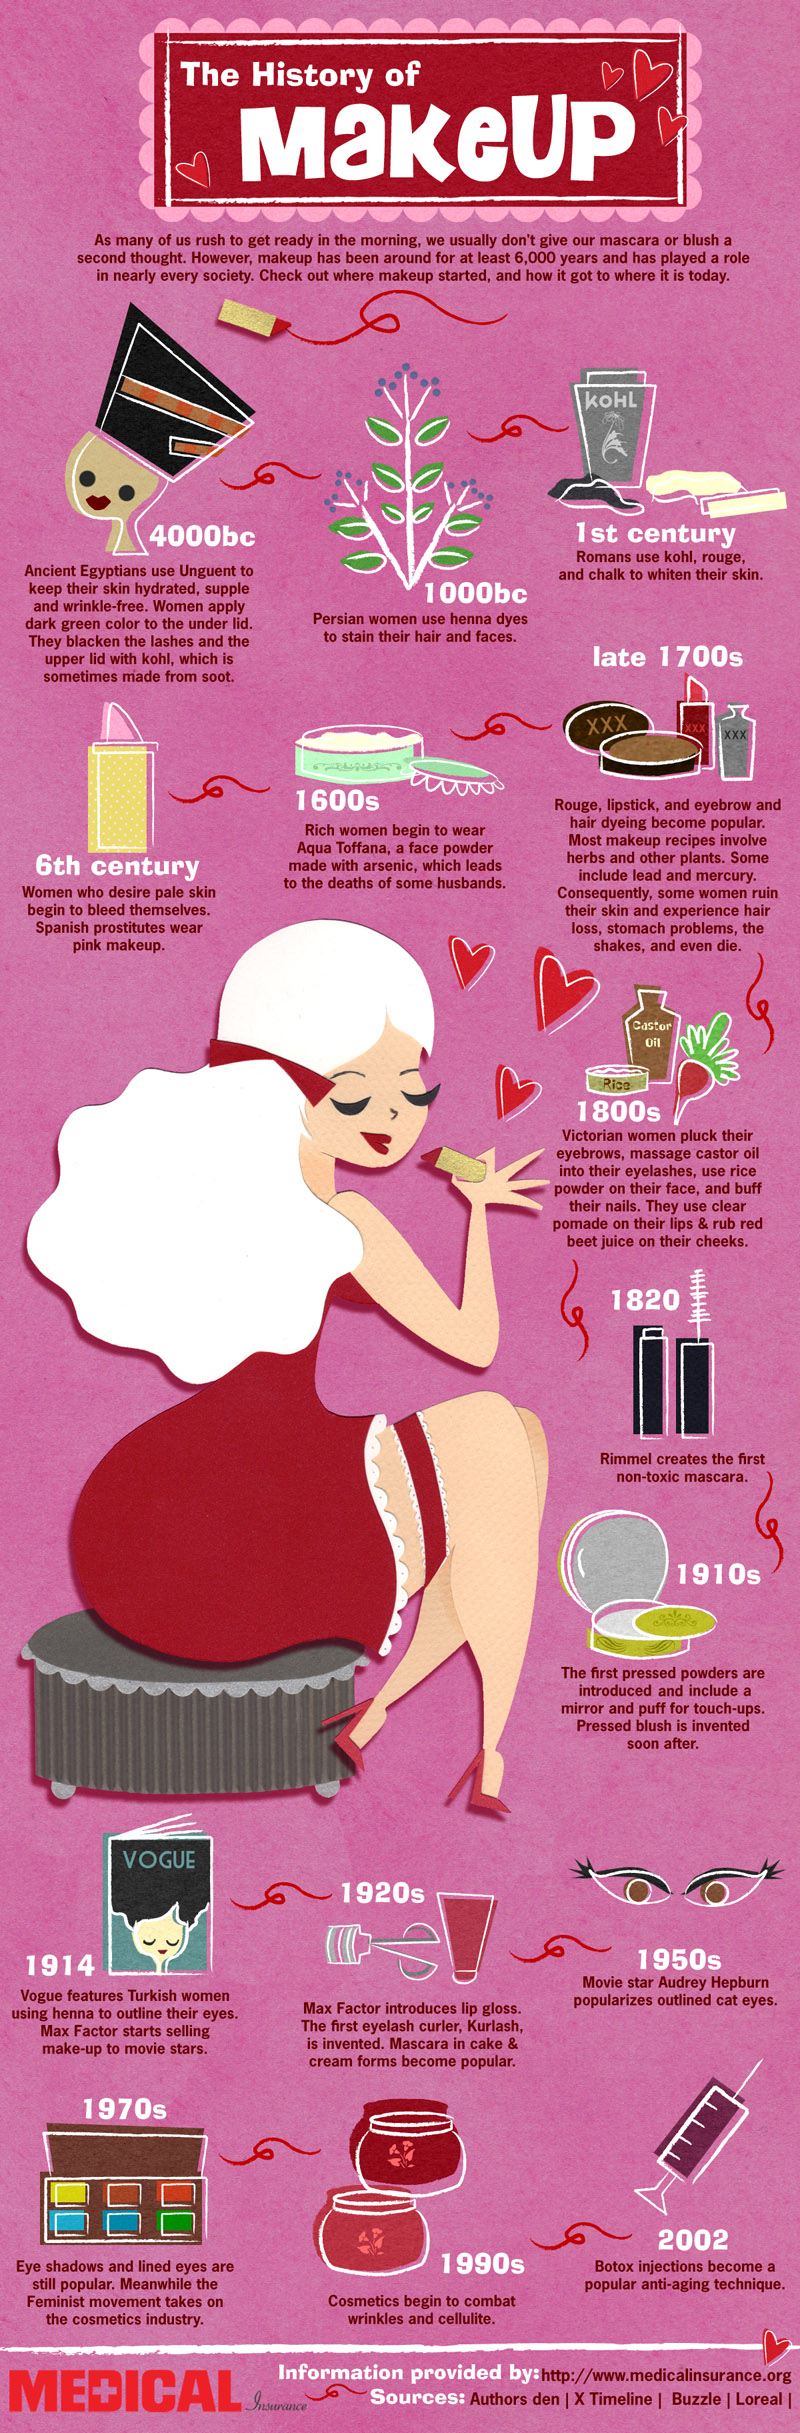 history of makeup Infographic